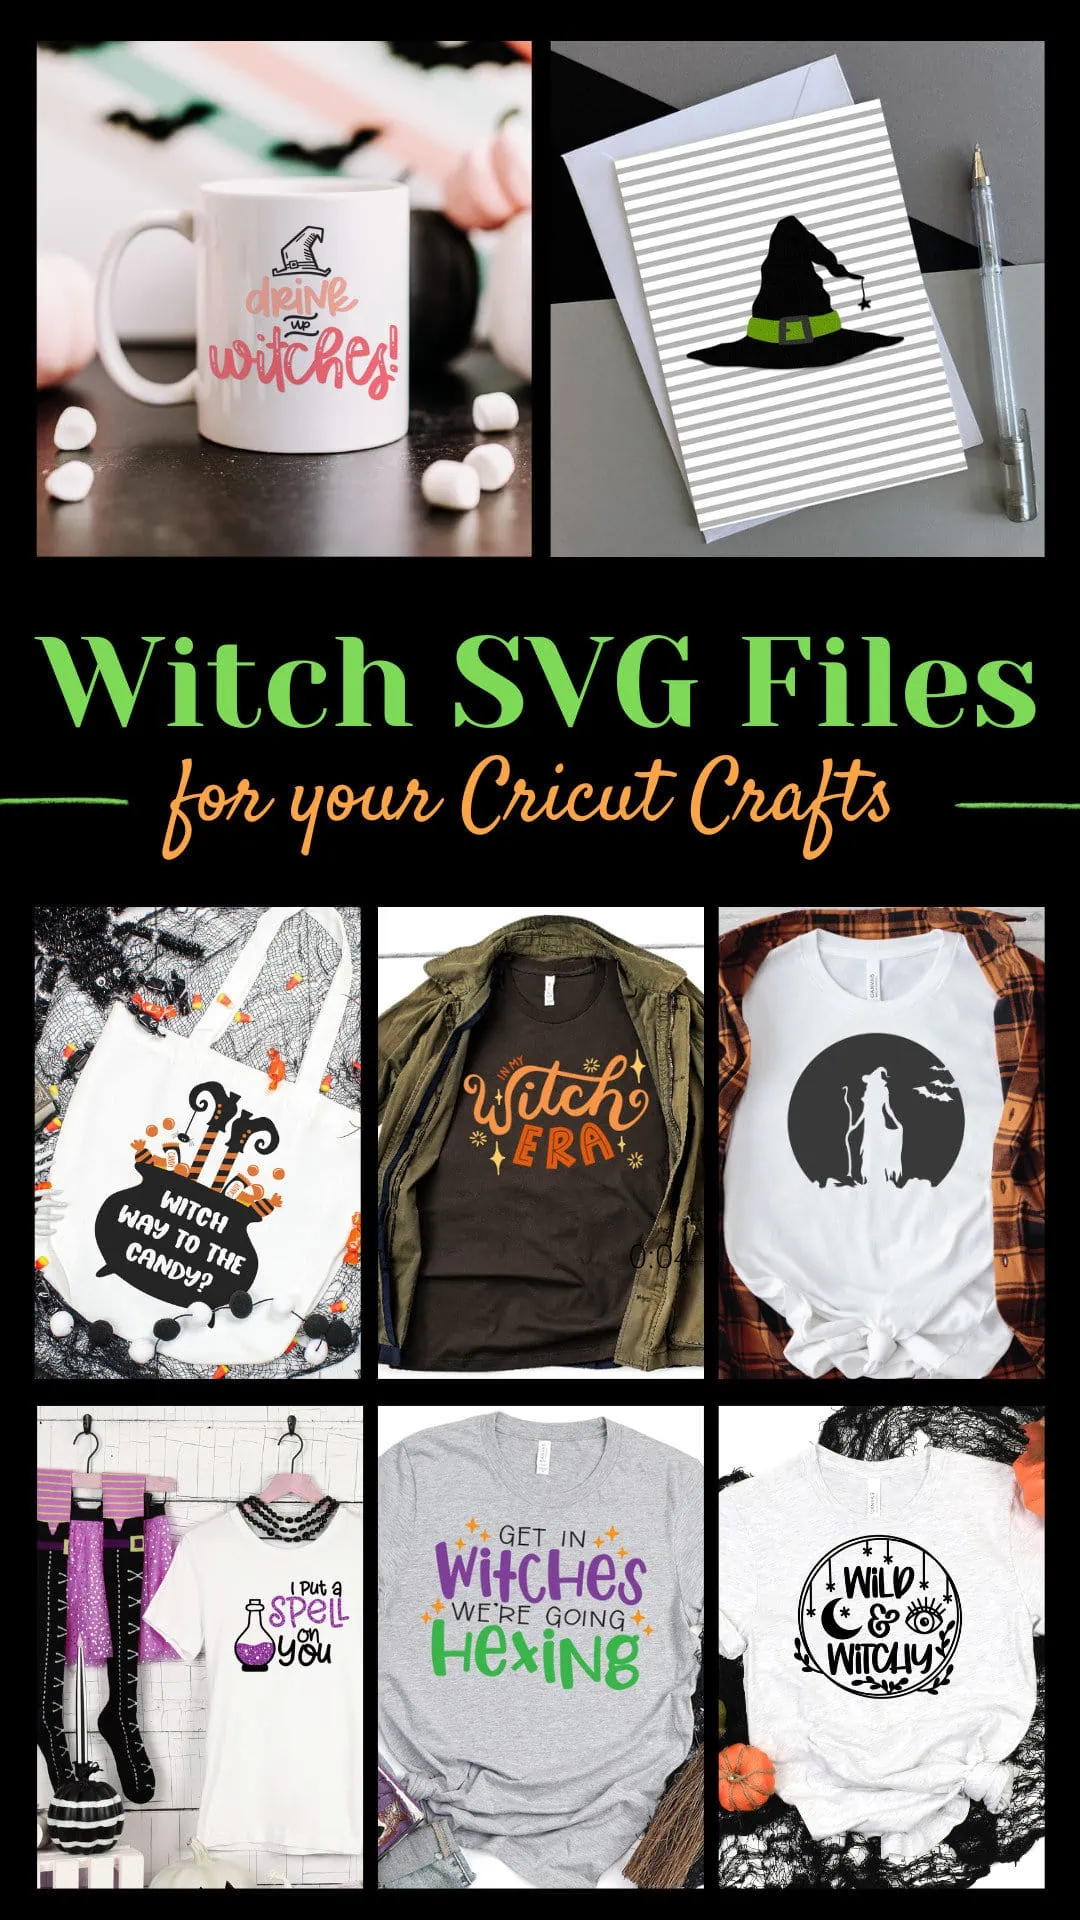 Witch SVG files - a collection of Halloween images for your Cricut crafts